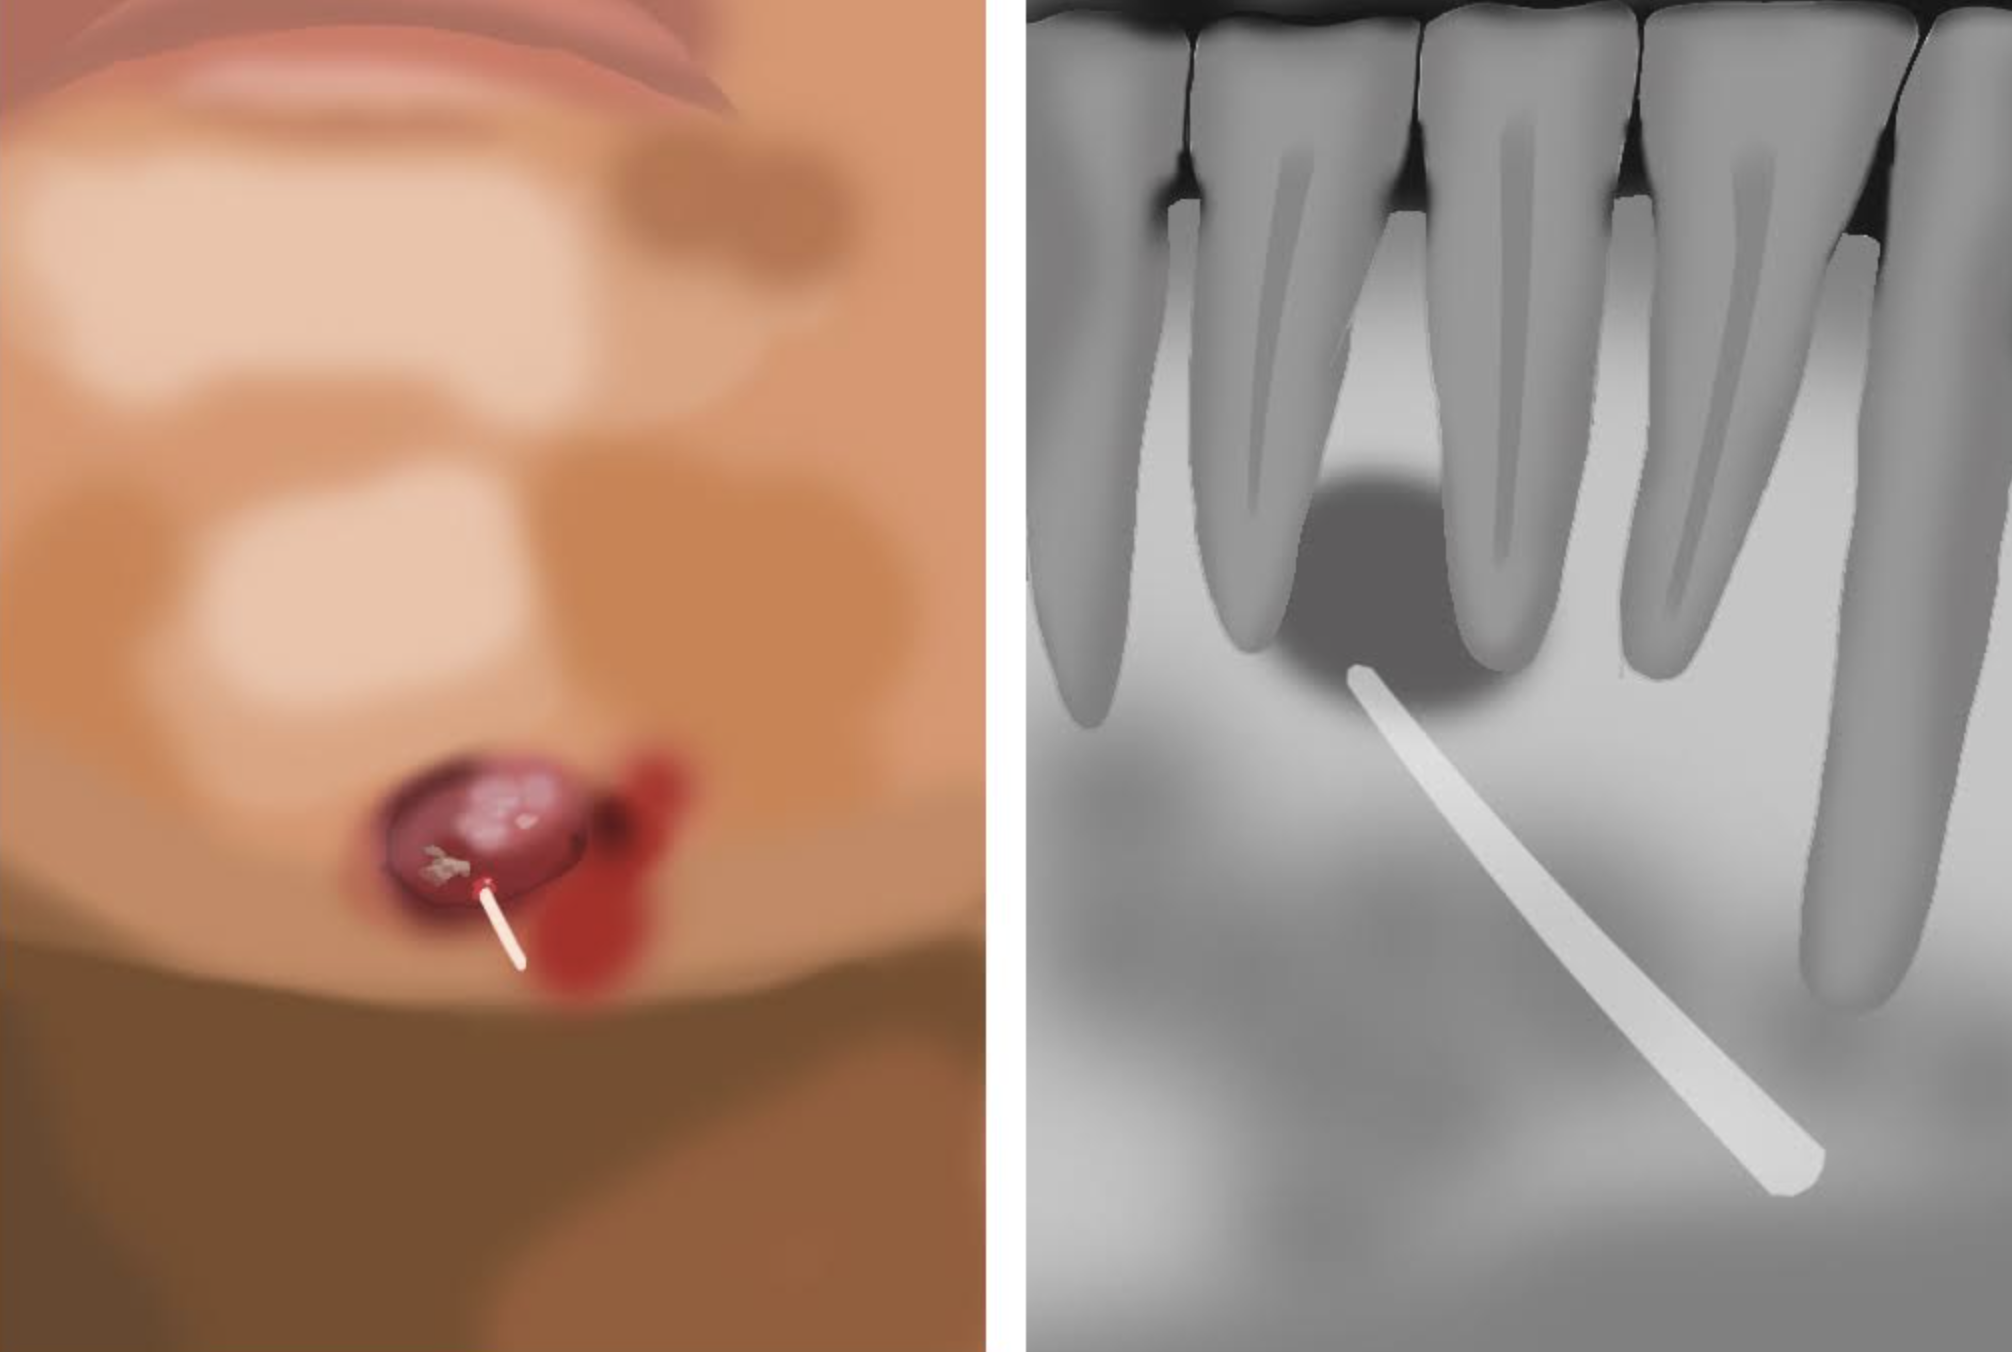 Example of an oral cutaneous fistula with associated x-ray.